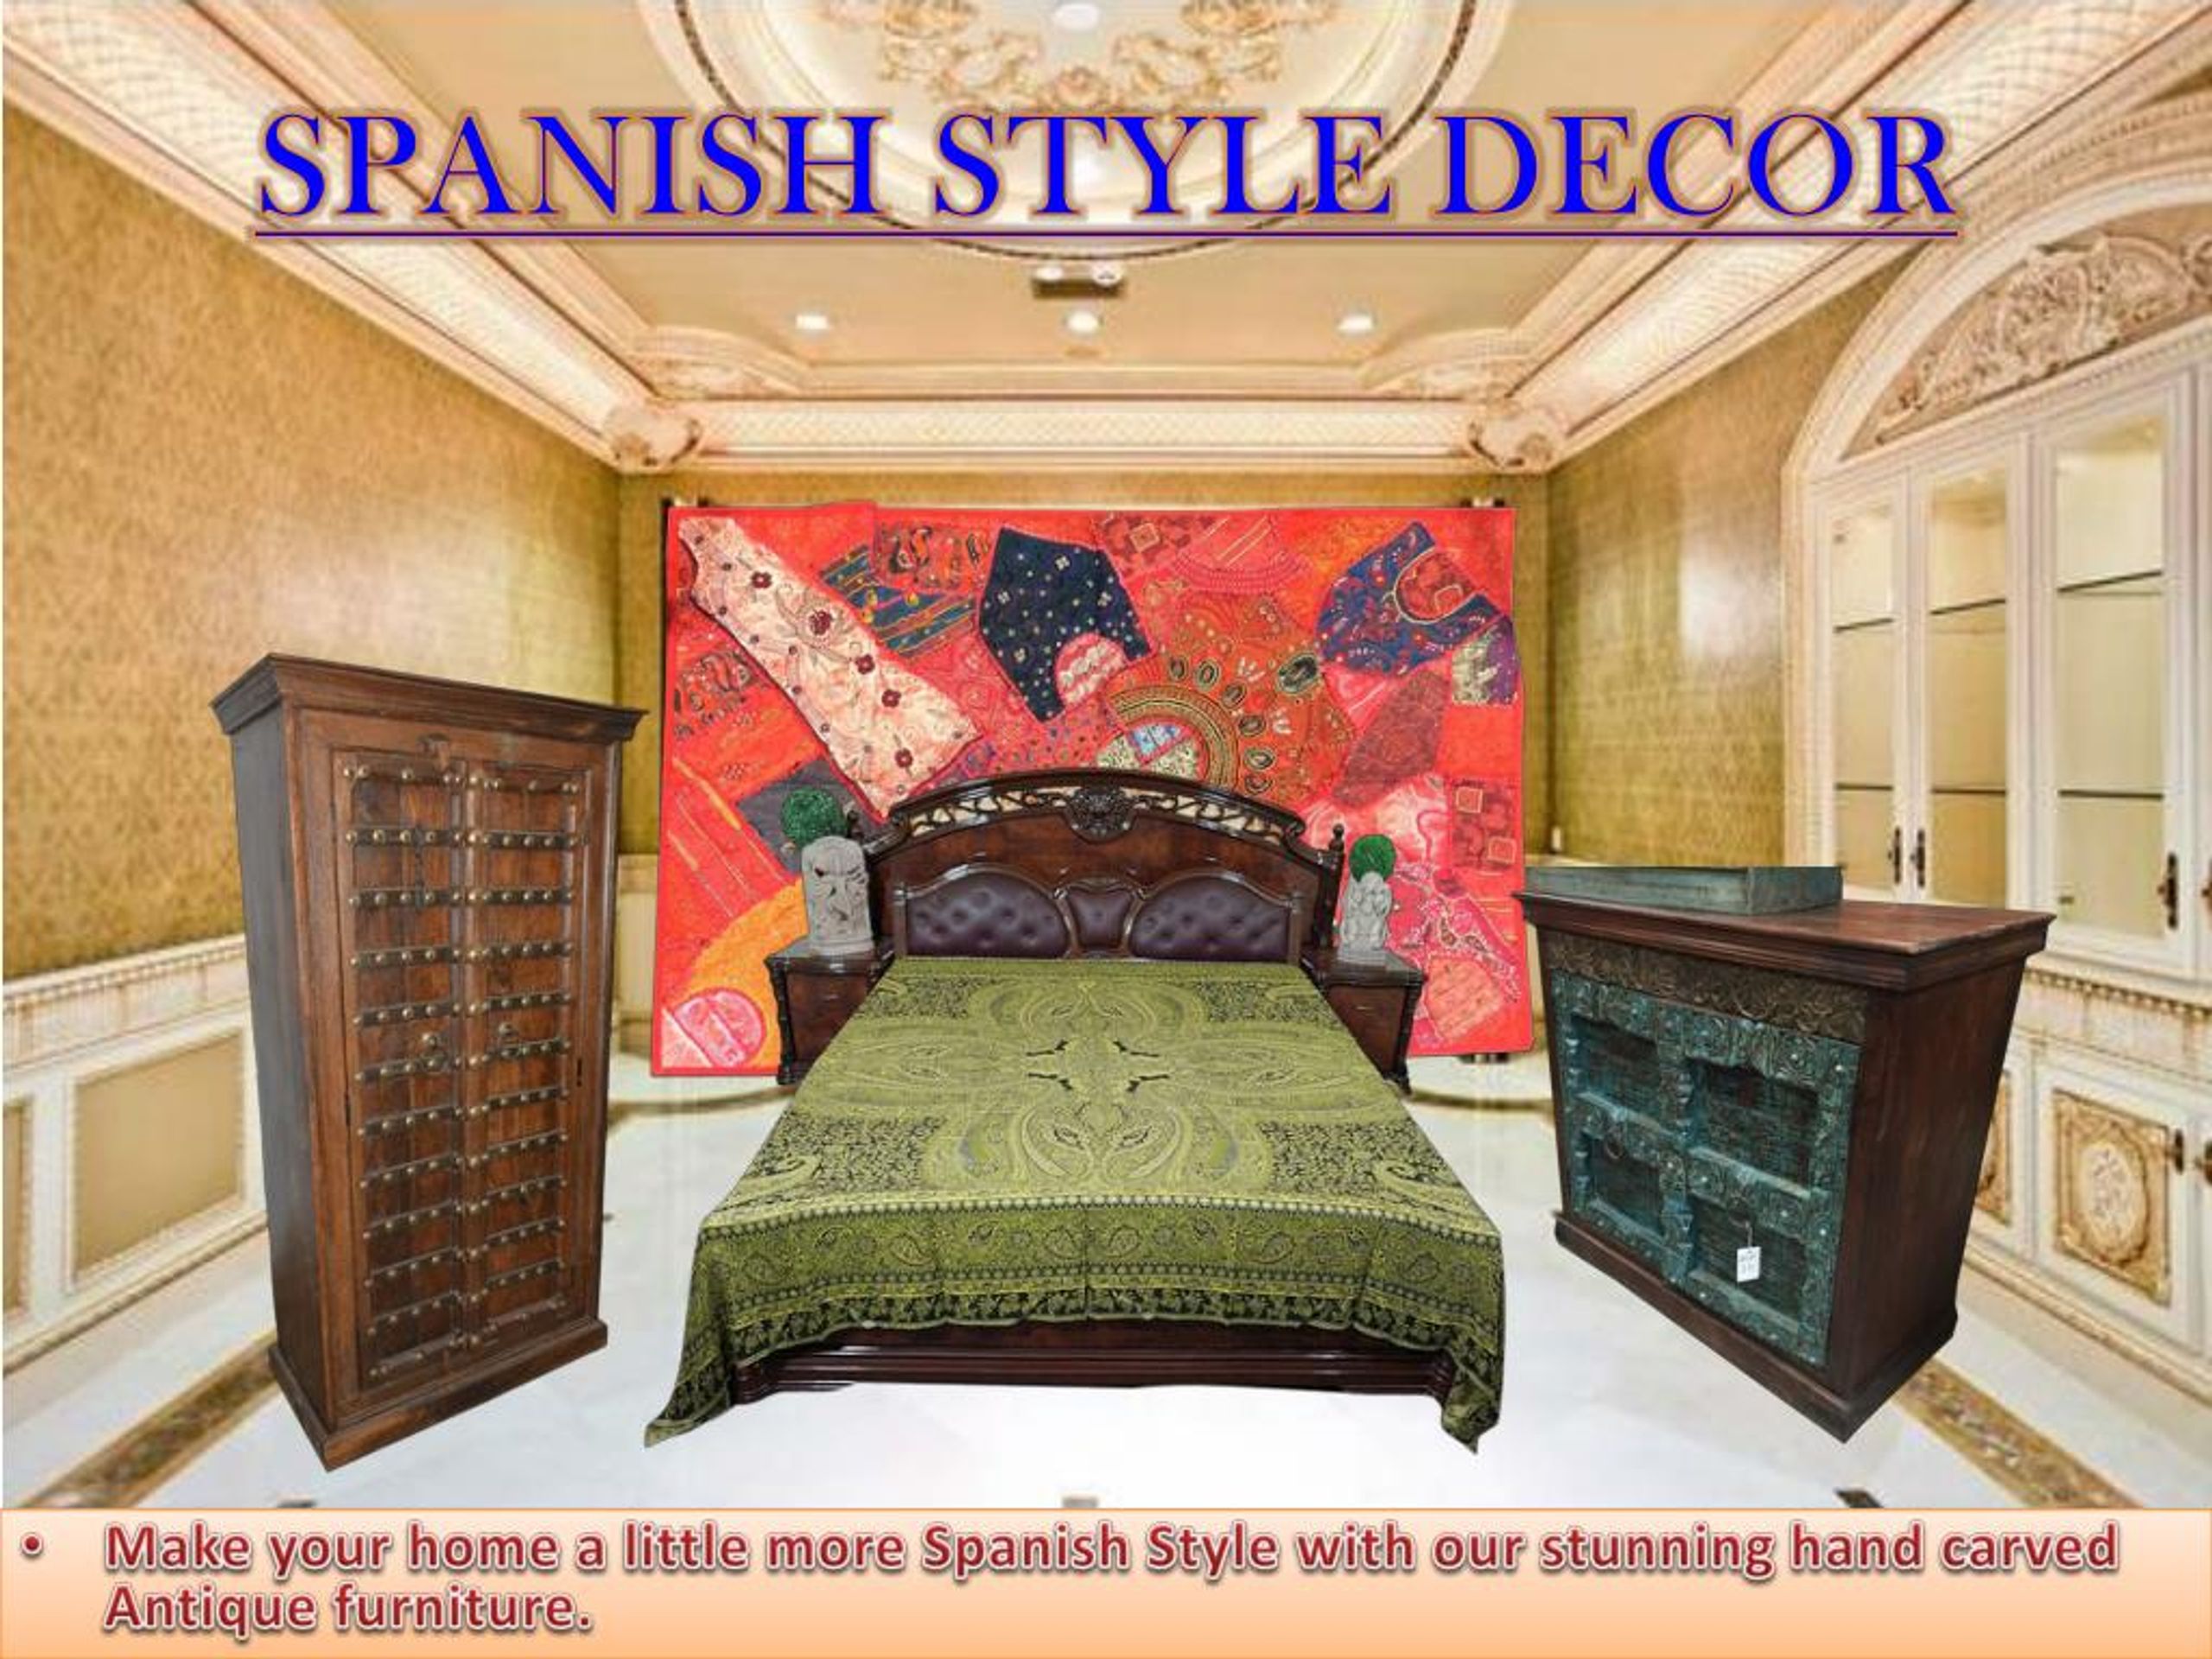 Spanish Home Decor : 25 Charming Spanish Home Decor Ideas Digsdigs / This concept can be combined with several other interior design styles to give a unique and exclusive impression.